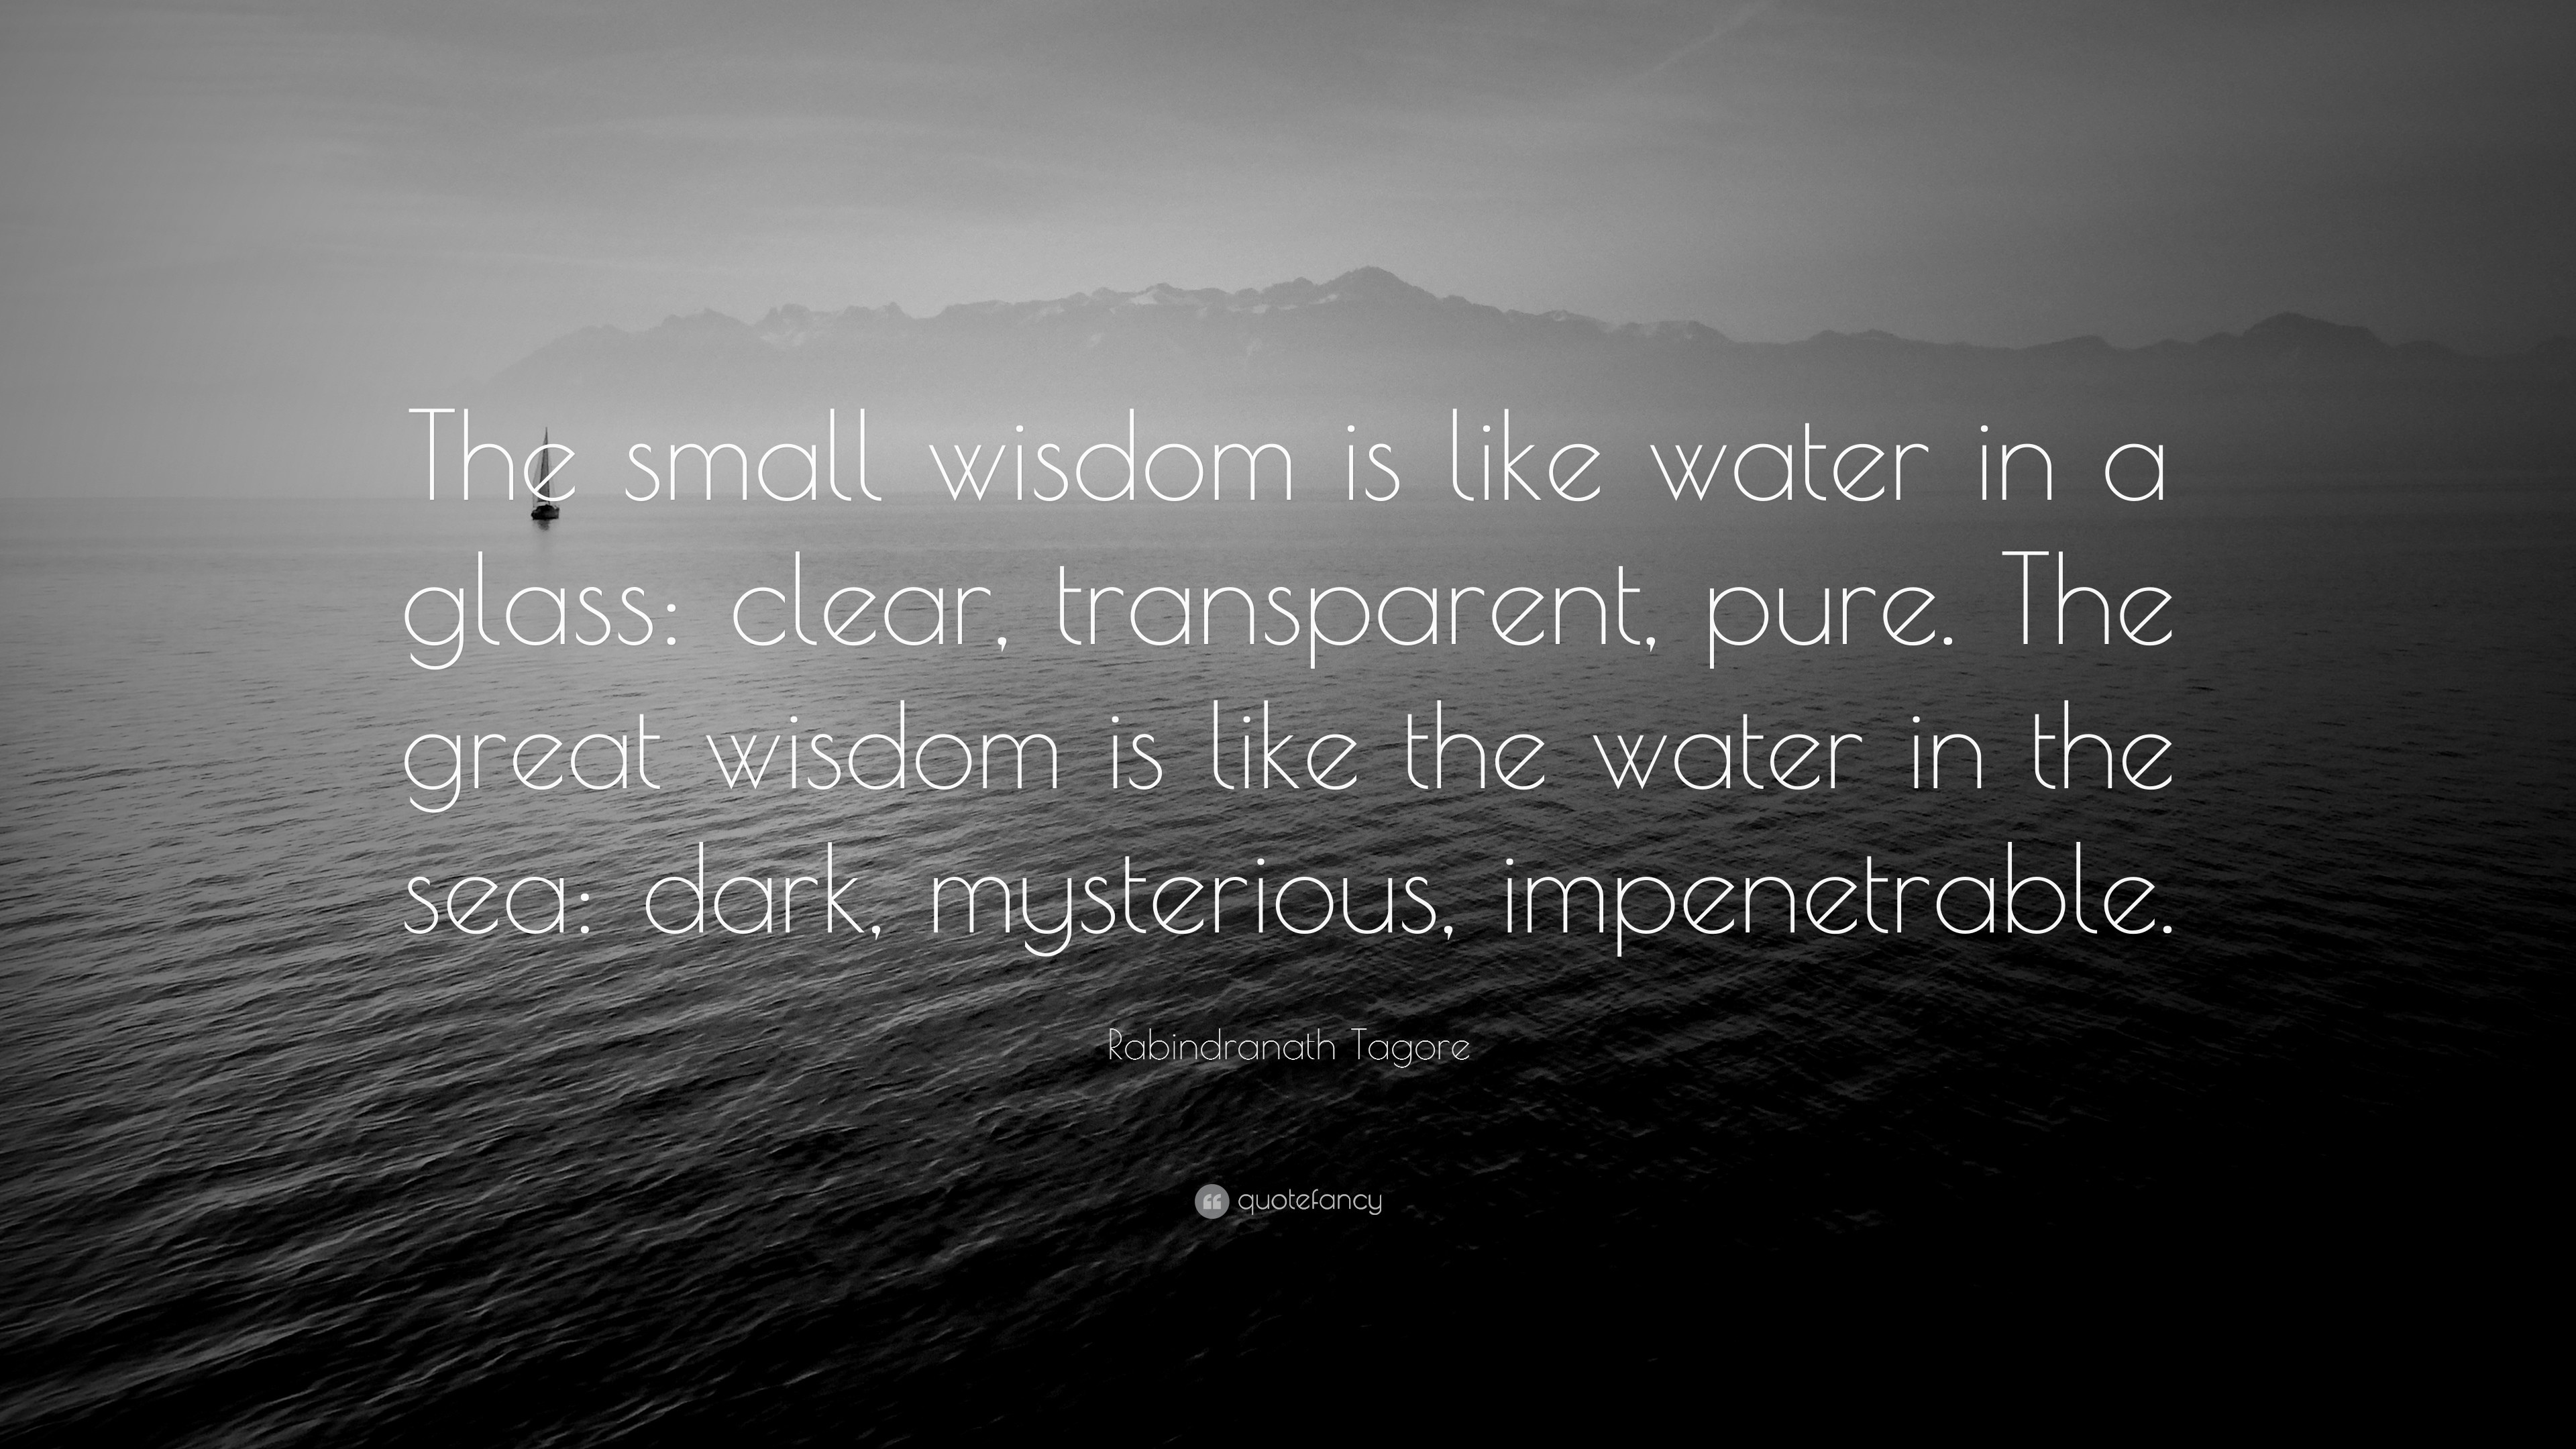 3840x2160 Rabindranath Tagore Quote: “The small wisdom is like water in a glass: clear